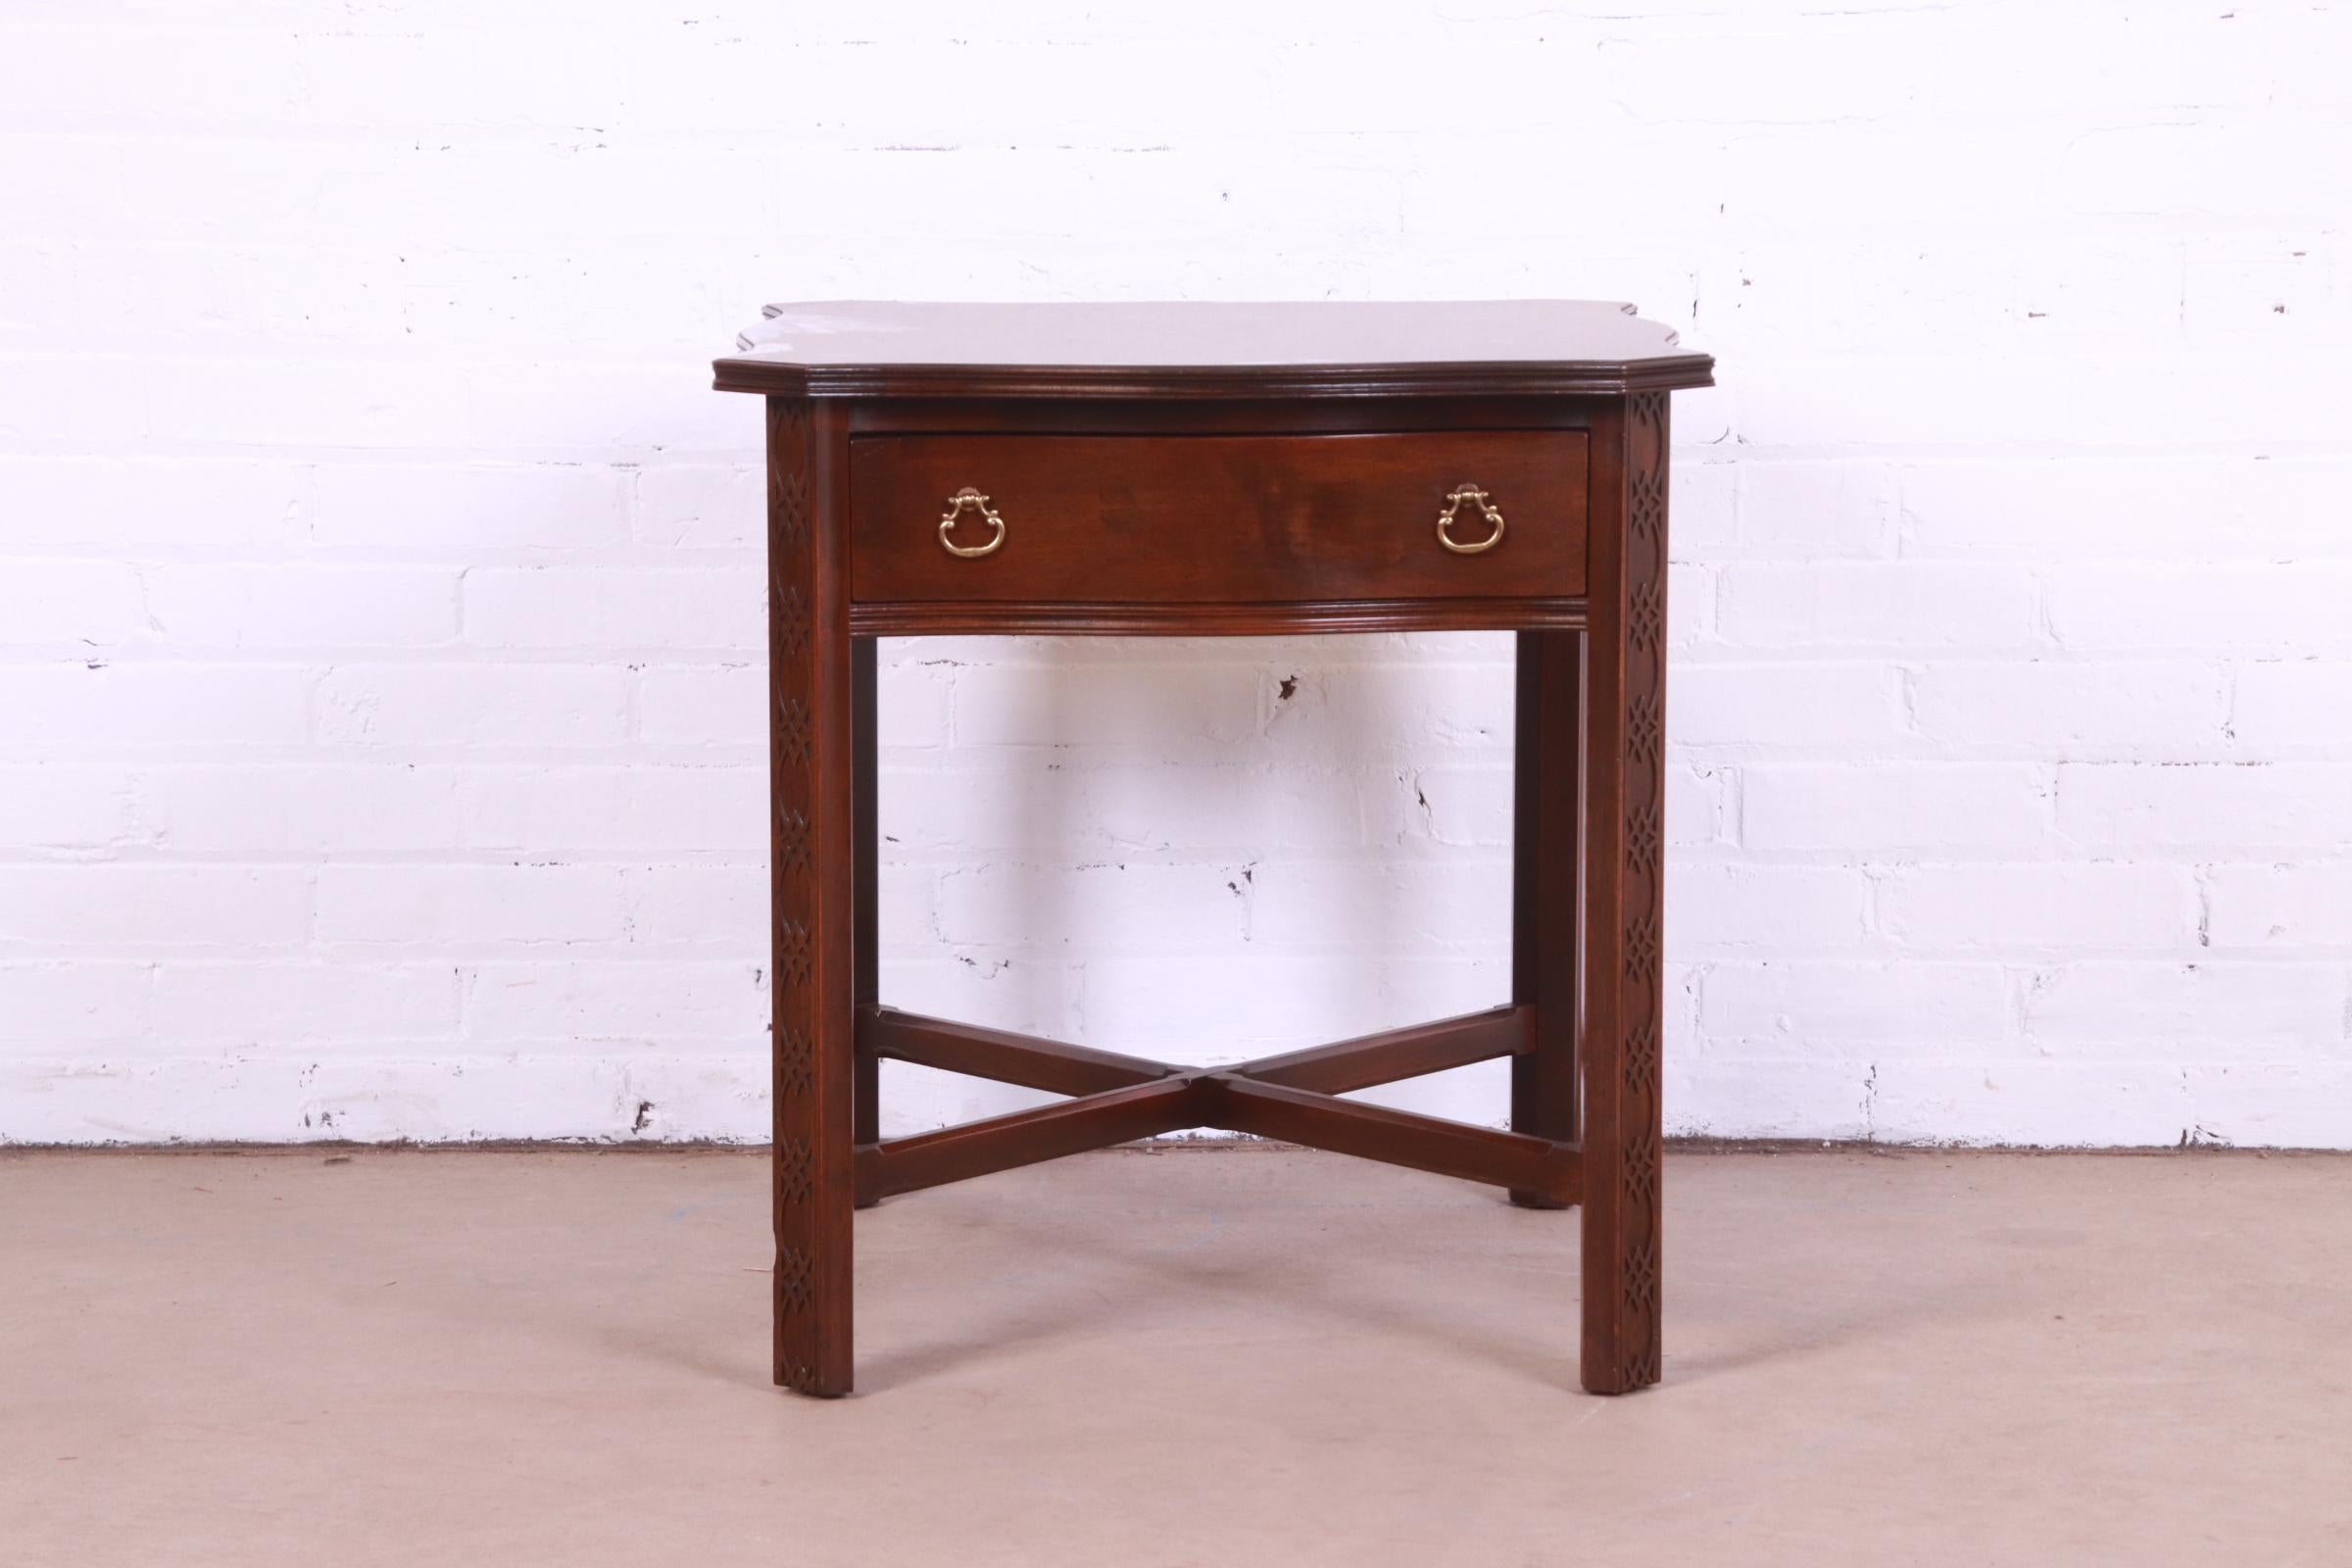 A gorgeous Georgian or Chippendale style tea table or occasional side table

By Ethan Allen

USA, Late 20th Century

Carved solid cherry wood, with 